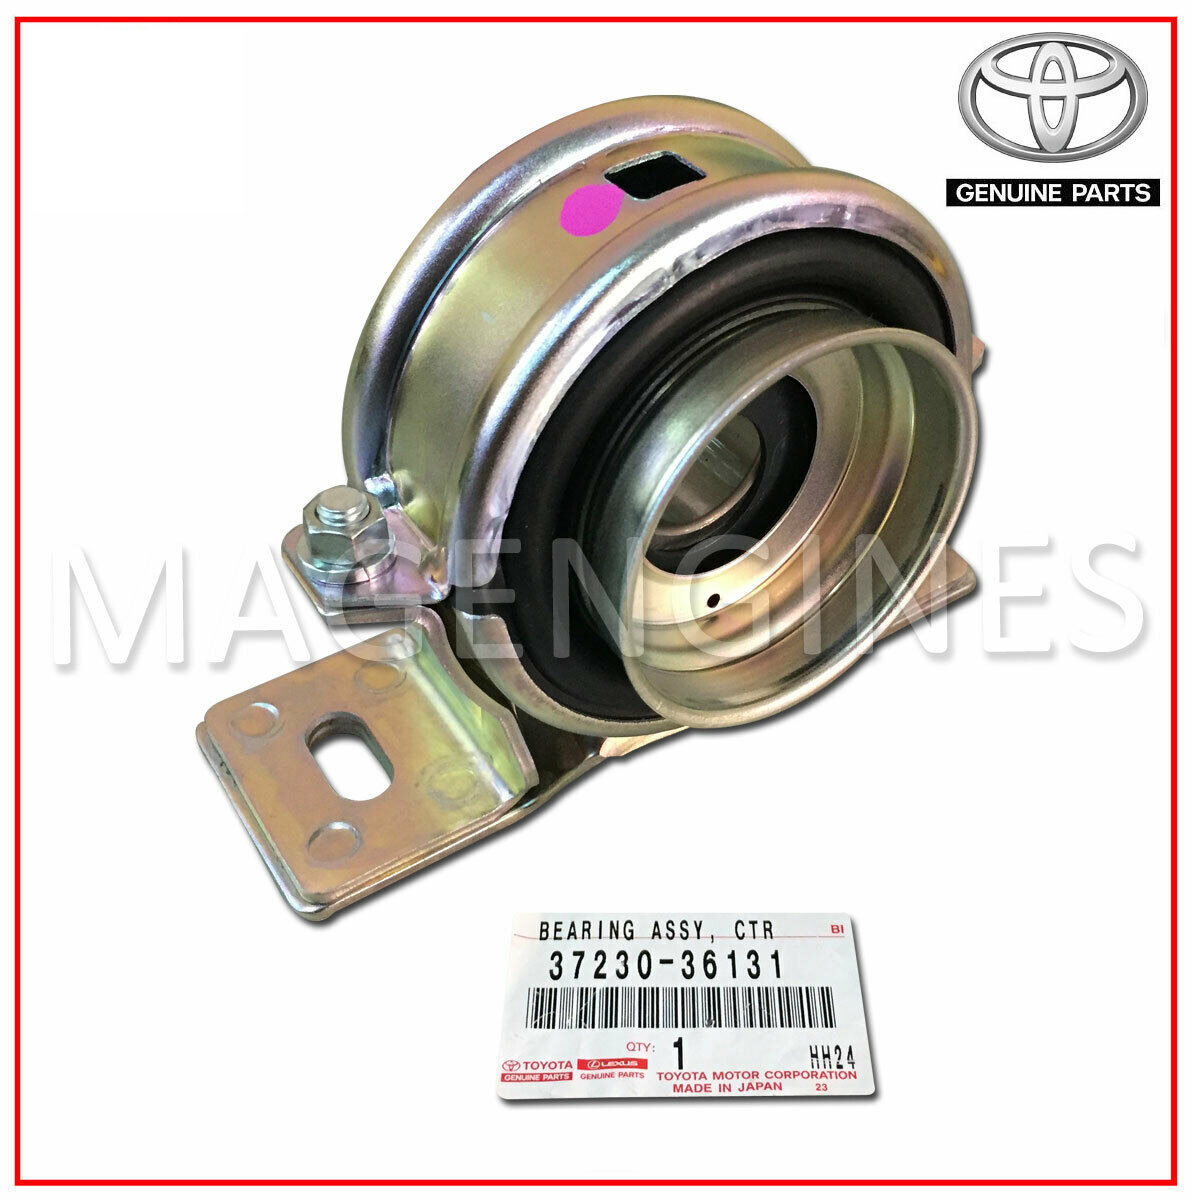 37230-20101 Genuine Toyota Parts Center Bearing Assy